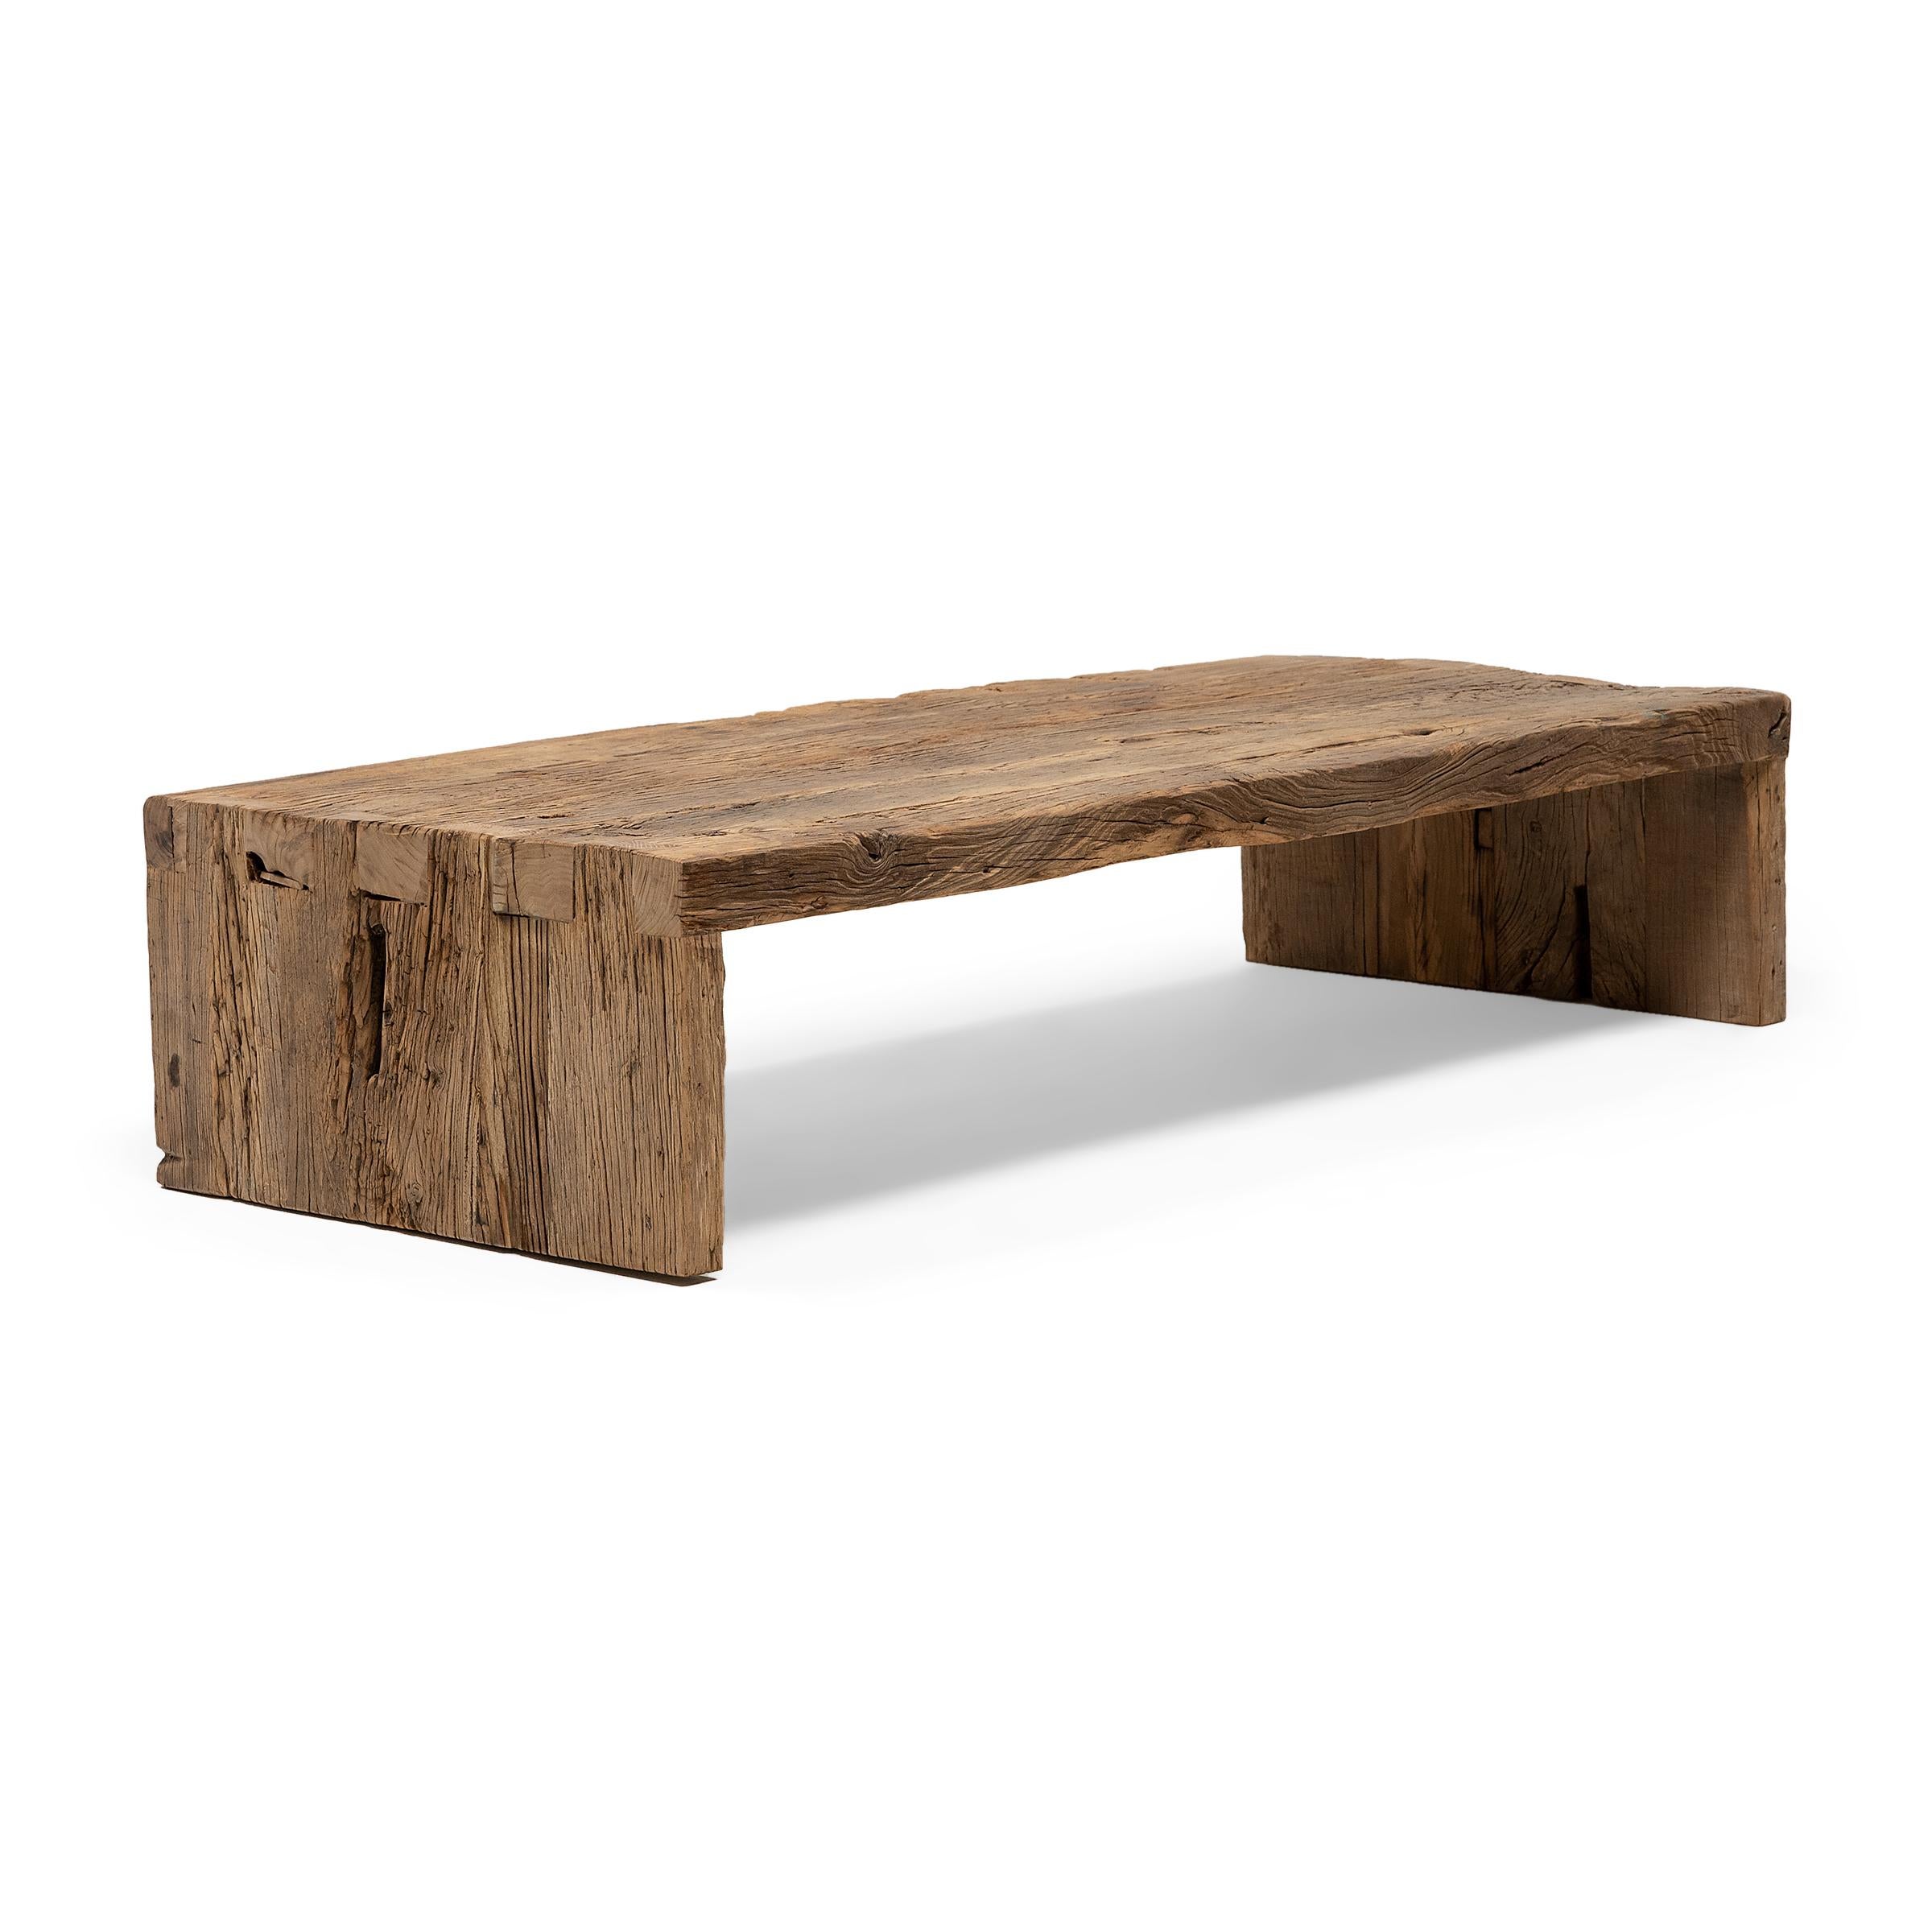 Chinese Low Reclaimed Elm Waterfall Coffee Table For Sale